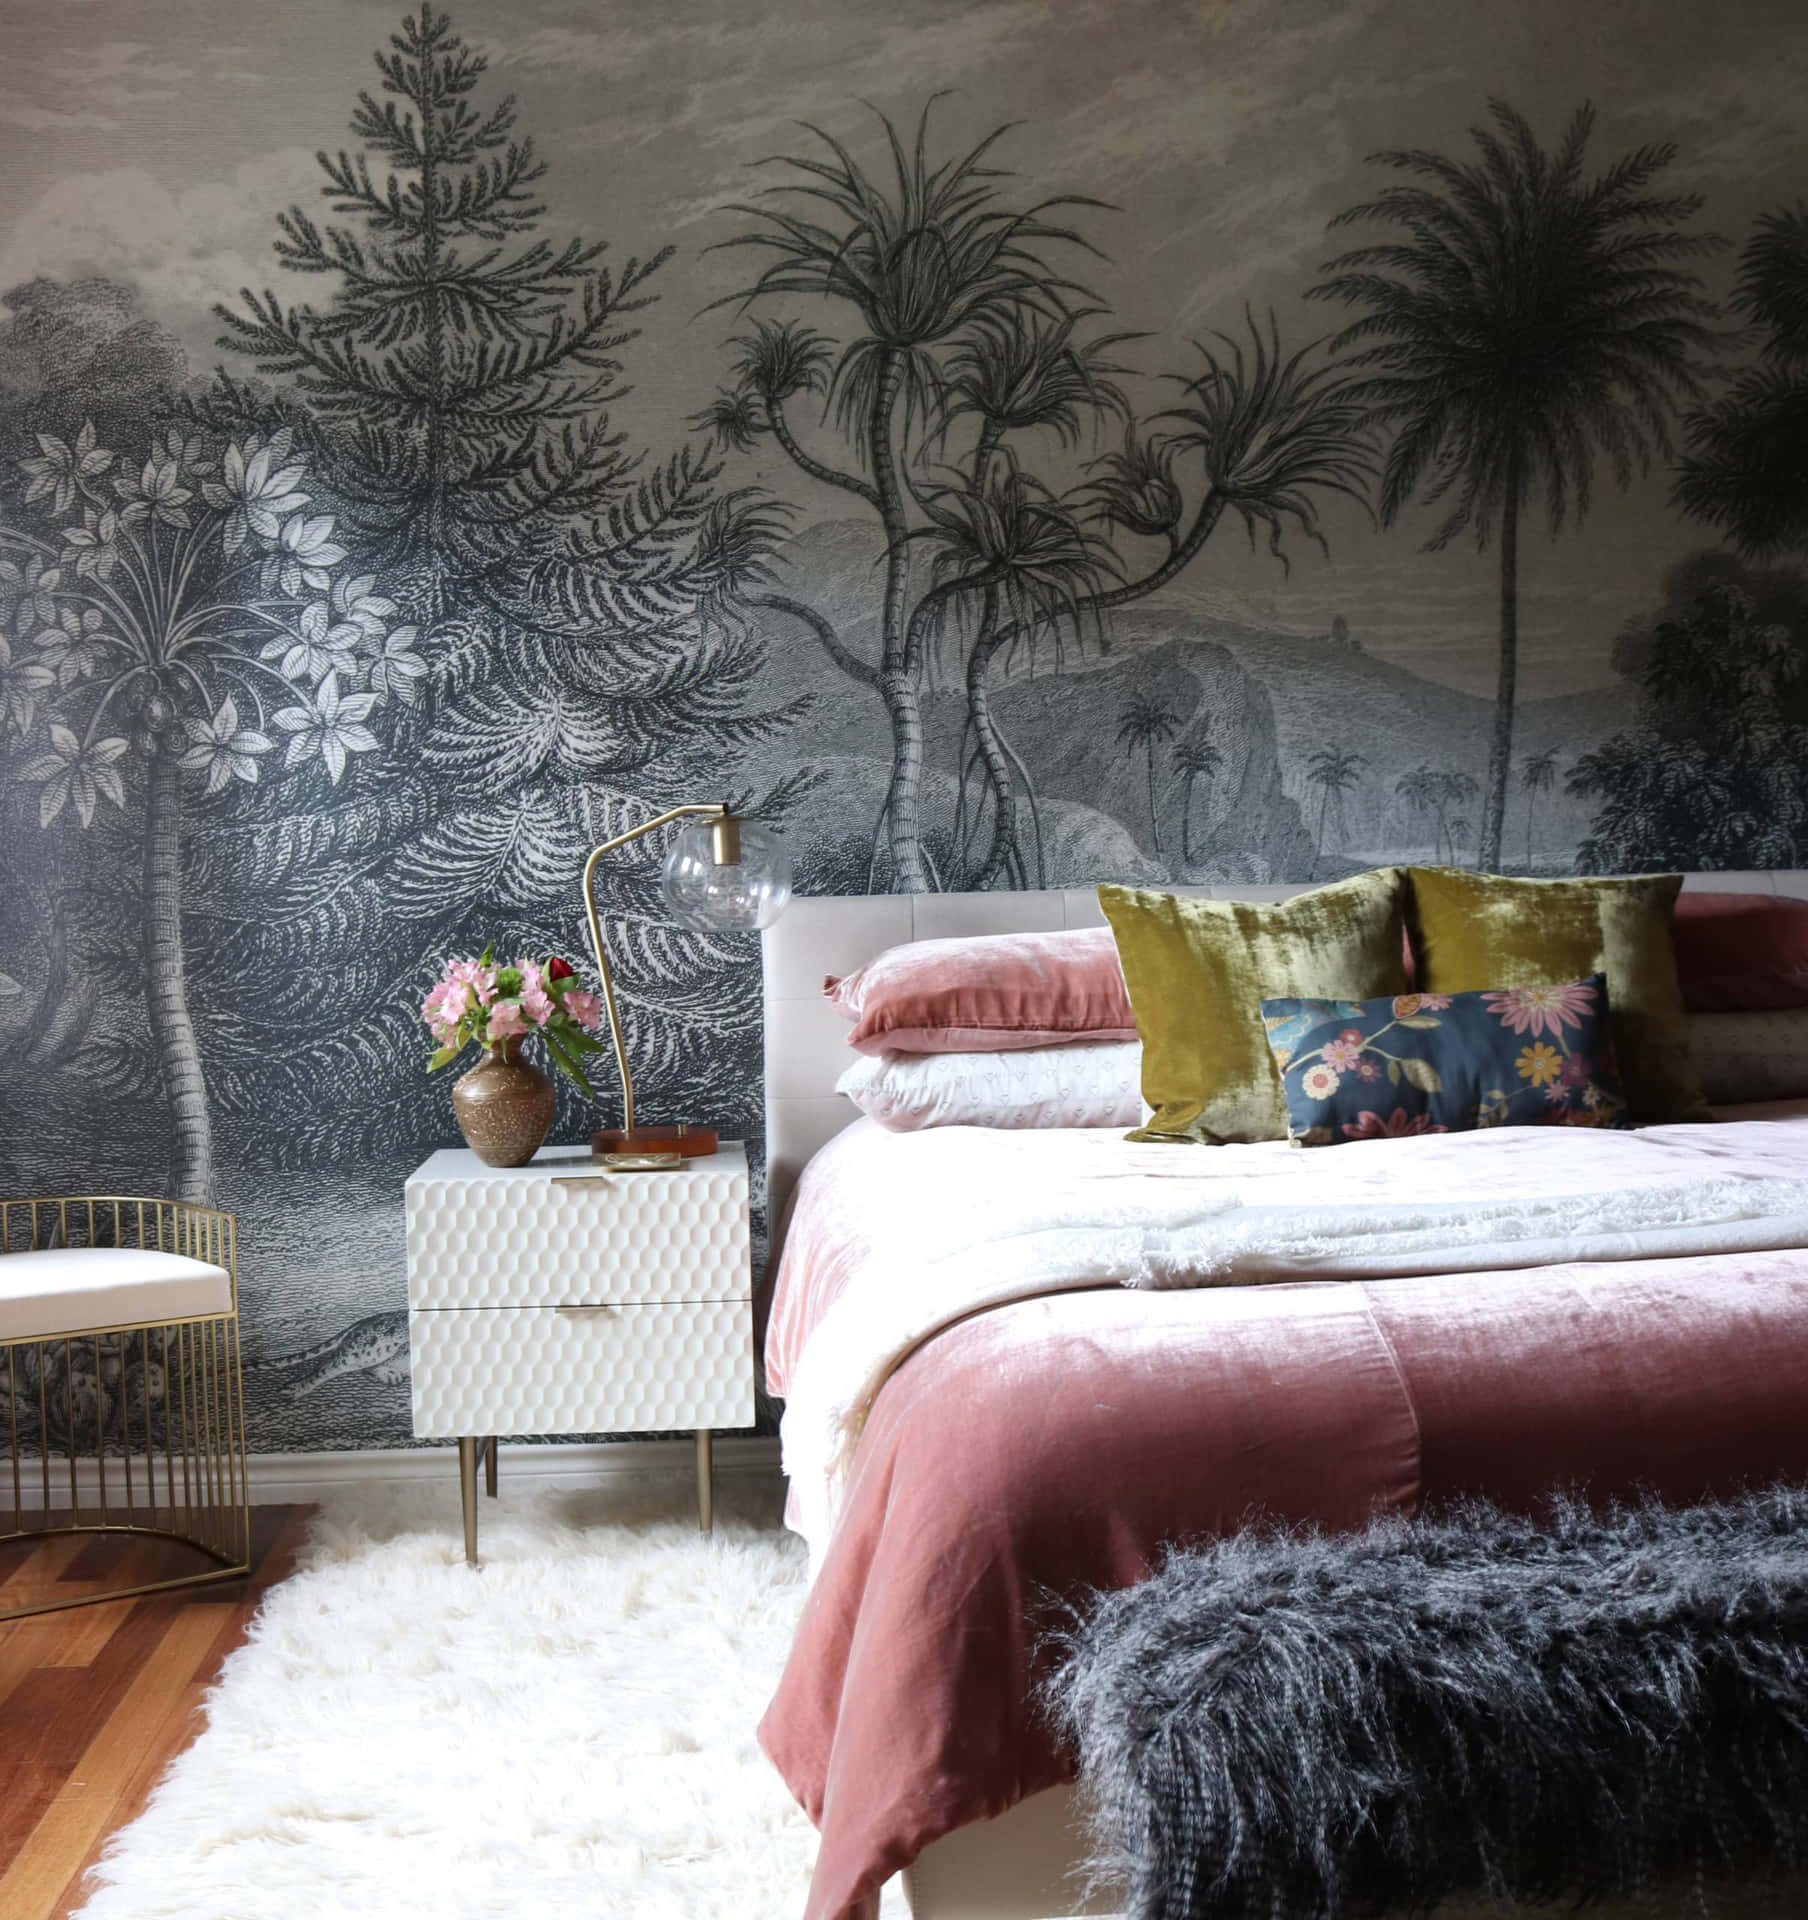 Caption: Designer King Size Bed with Printed Wall Background. Wallpaper